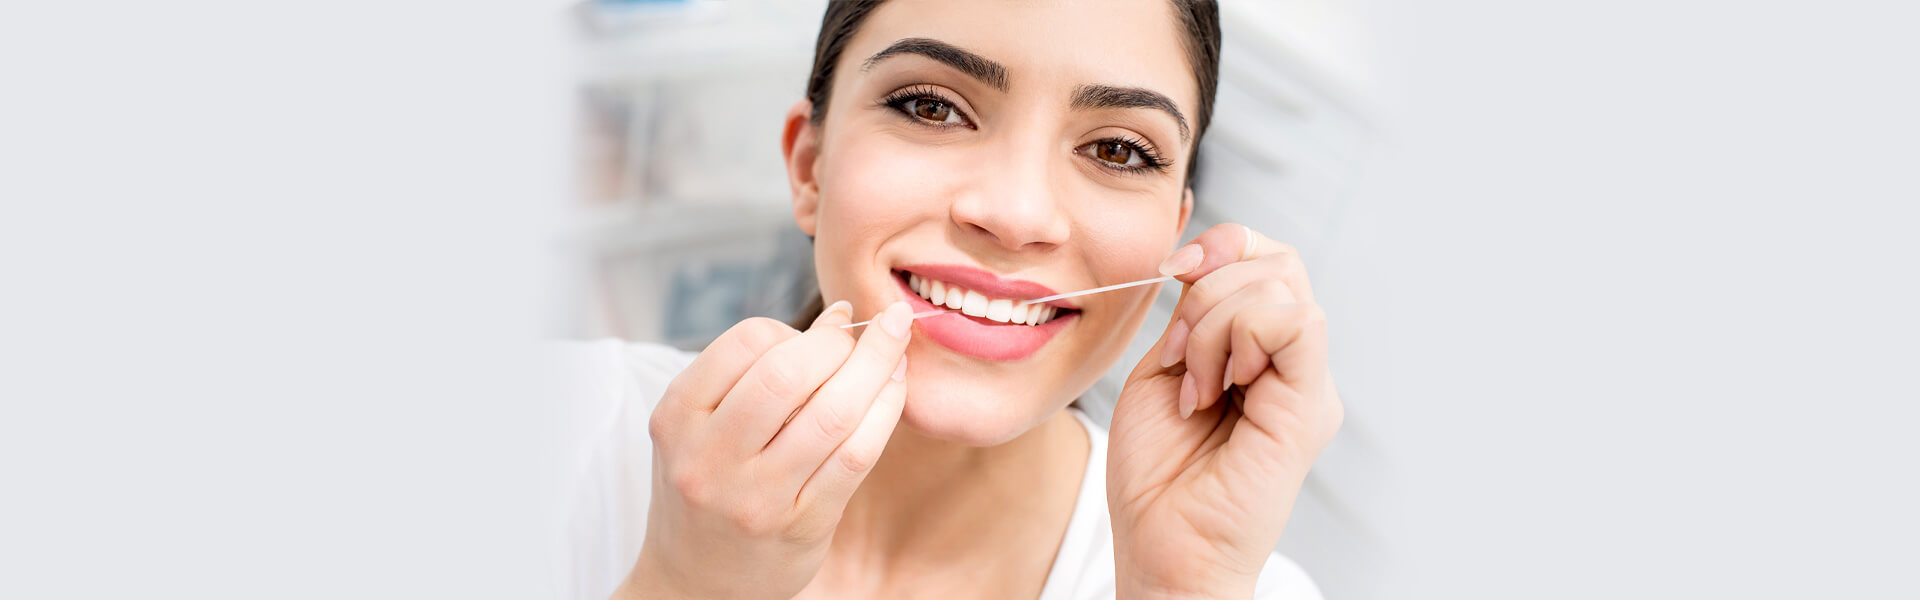 Improve Your Brushing and Flossing With These Tips